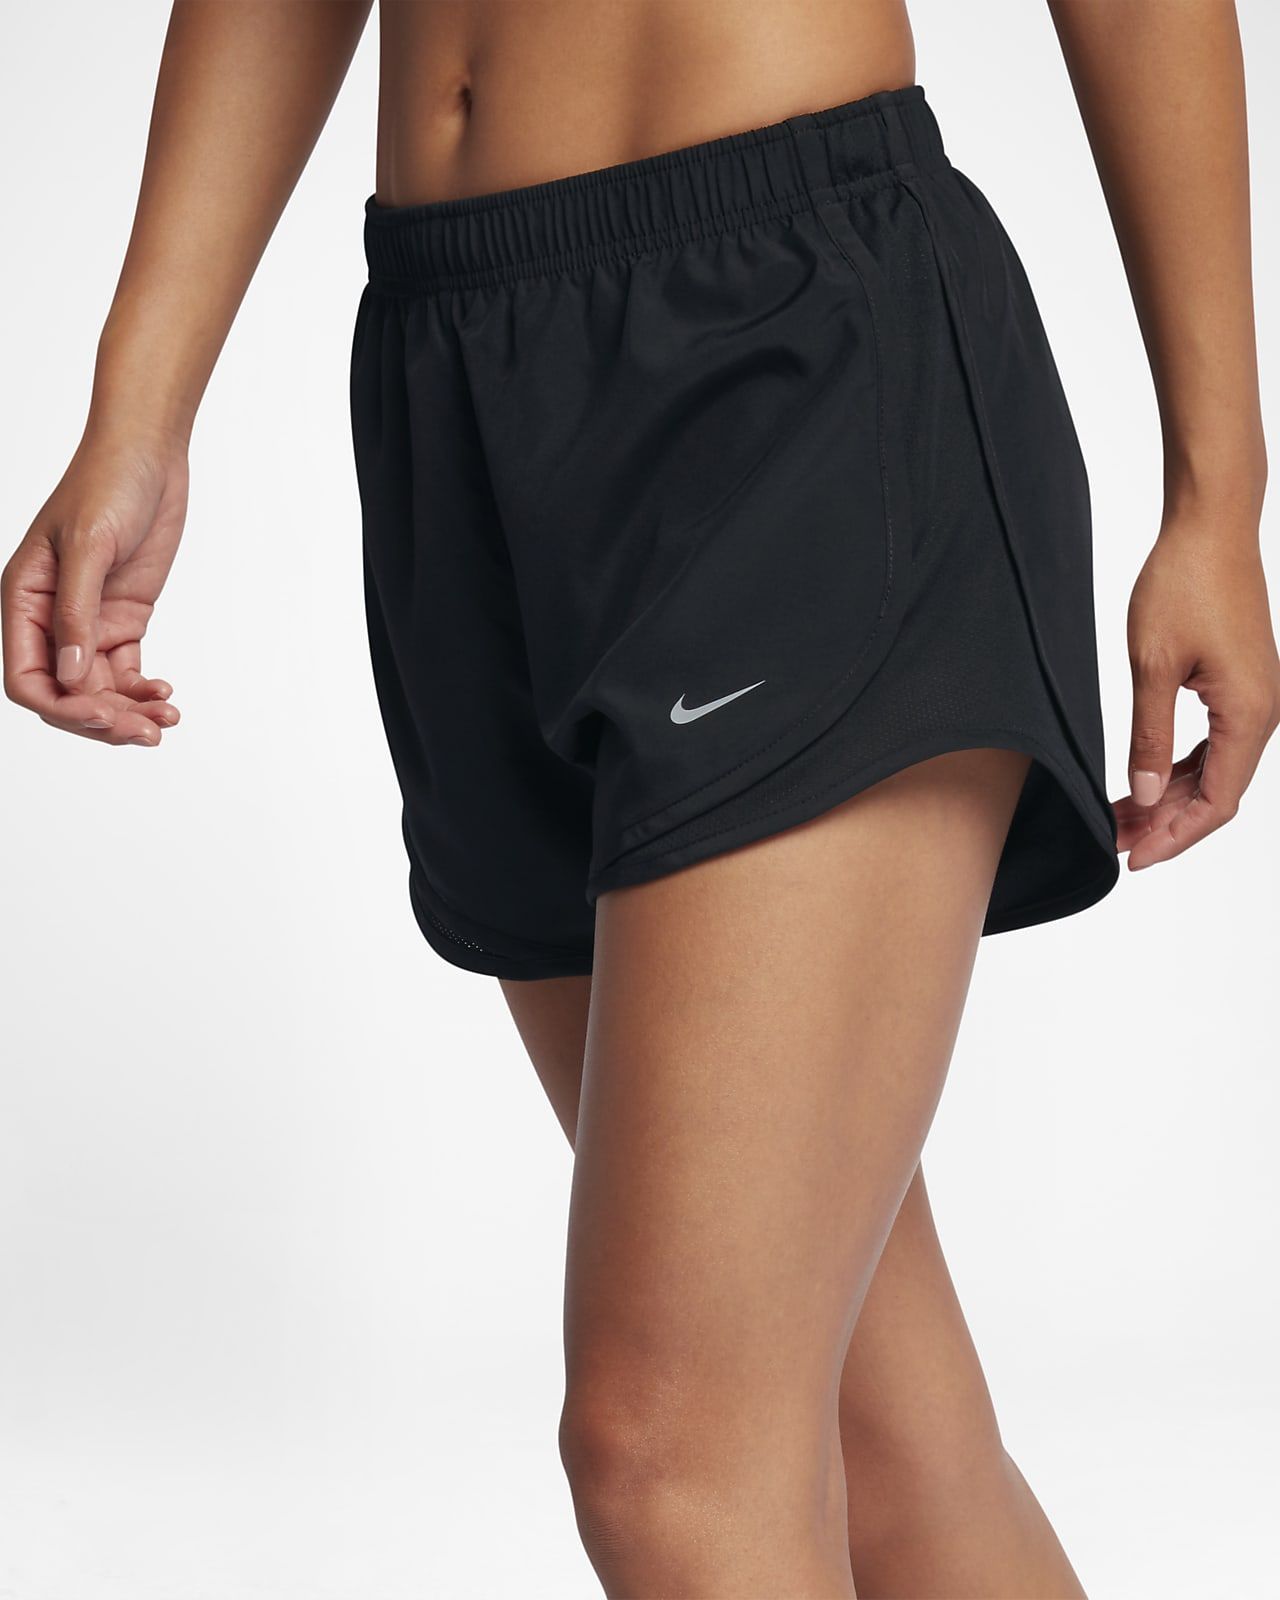 Nike Tempo Women's Brief-Lined Running Shorts. Nike.com | Nike (US)